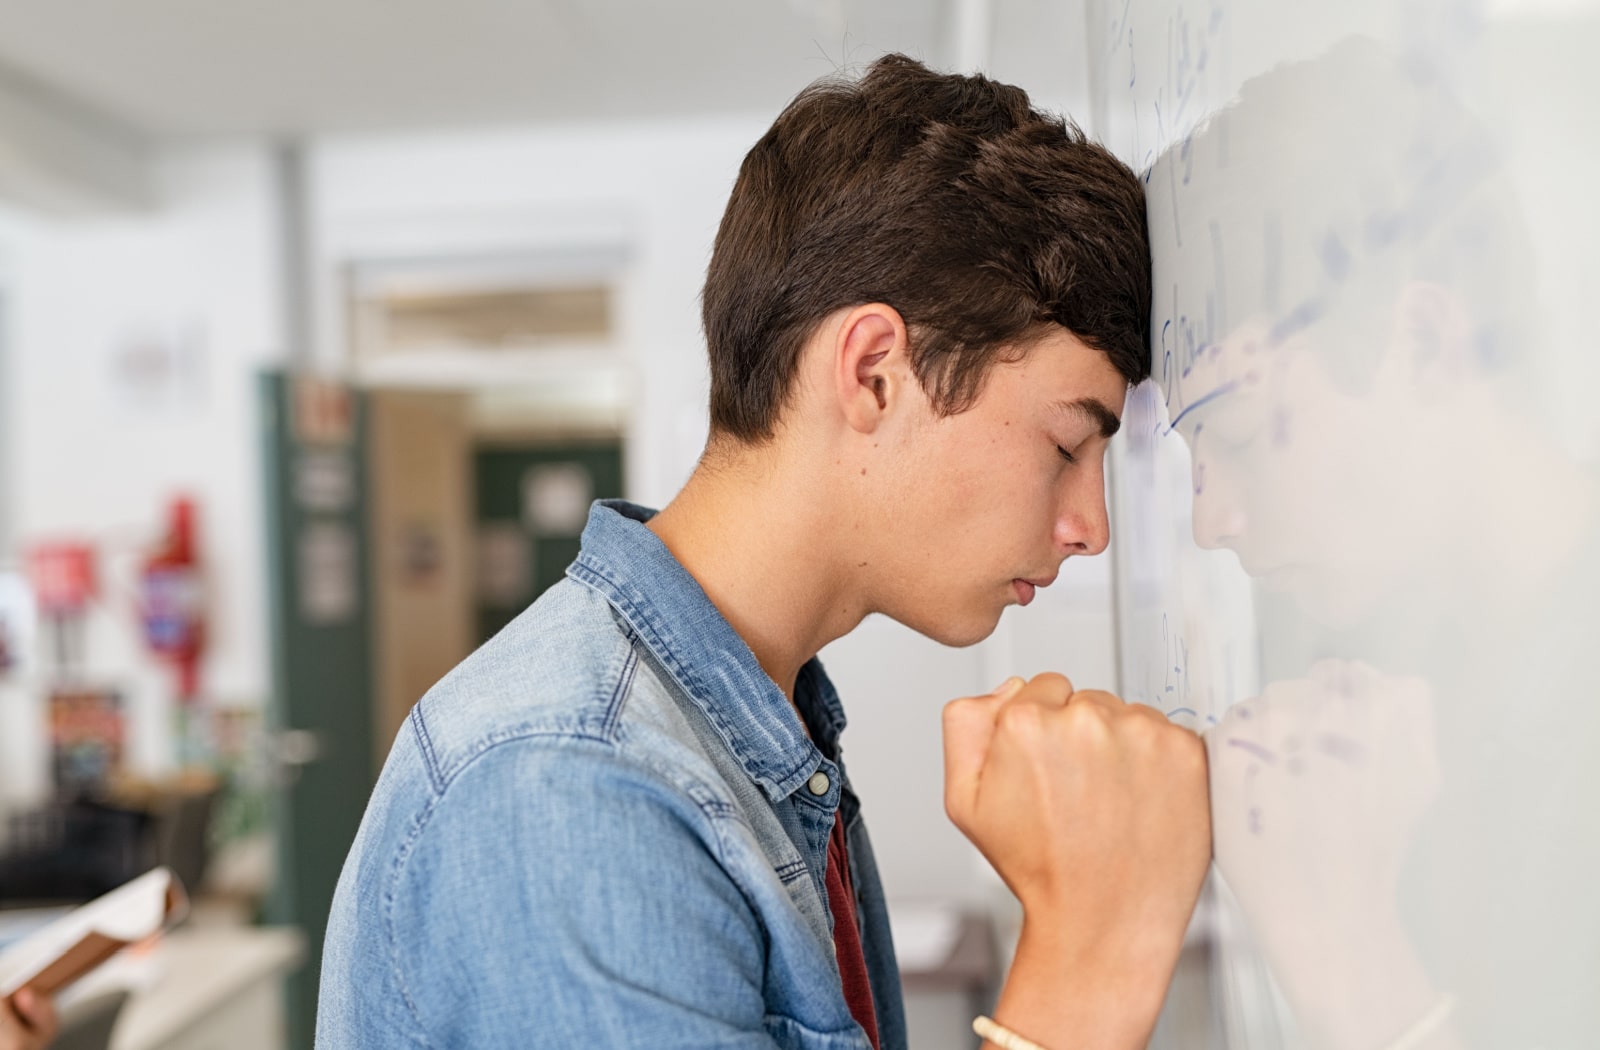 A stressed-out teenage boy pressing his head against a dry erase board at school